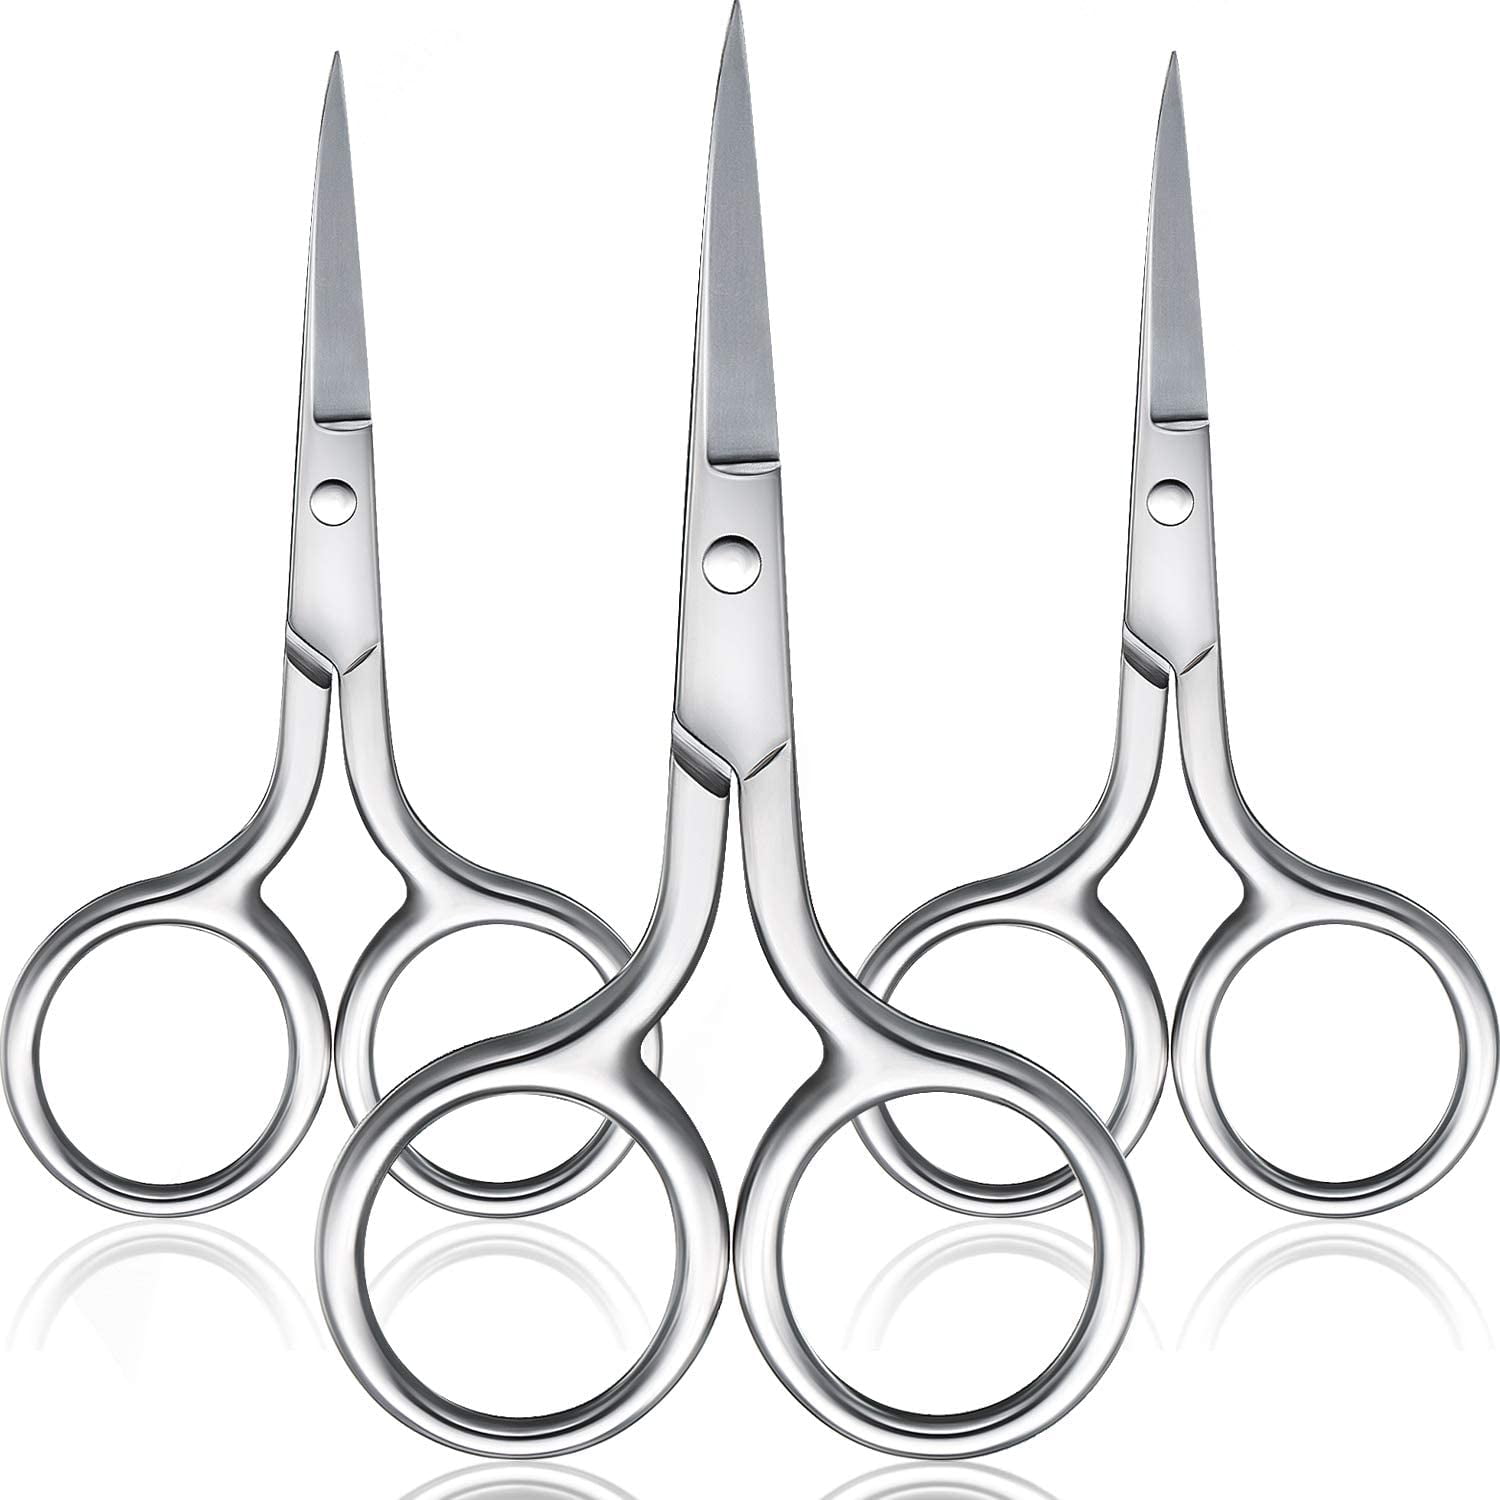 Coco's Closet Small Scissors For Grooming Stainless Steel Straight Tip  Scissor For Hair Cutting – Beard, Ear, Eyebrows, Moustache, Nose Trimming |  Small Scissors For Grooming Stainless Steel Straight Tip Scissor For